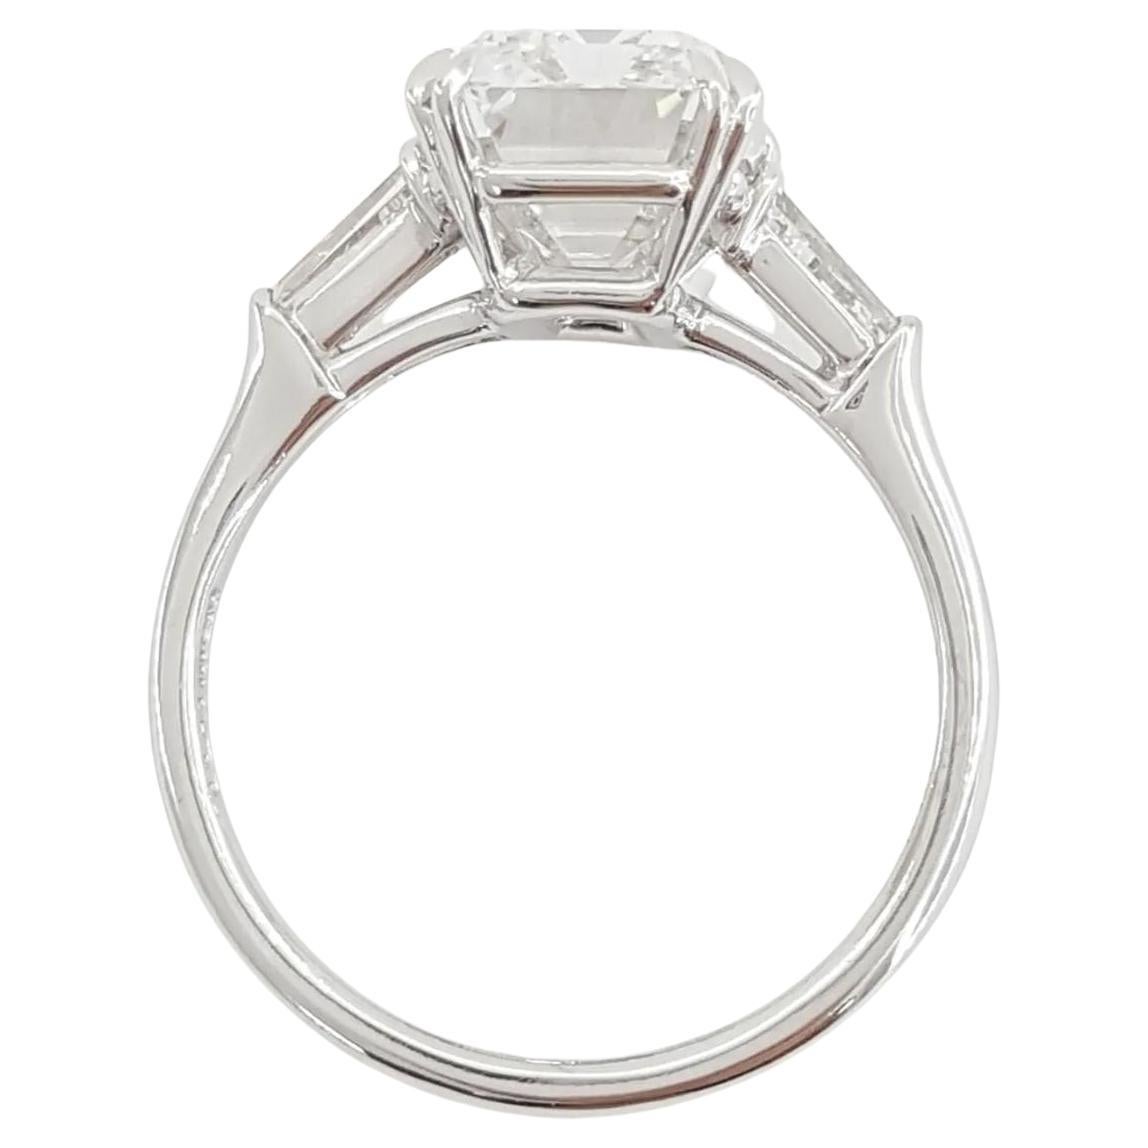 HARRY WINSTON Investment grade D color Emerald Cut Diamond Ring For Sale 1